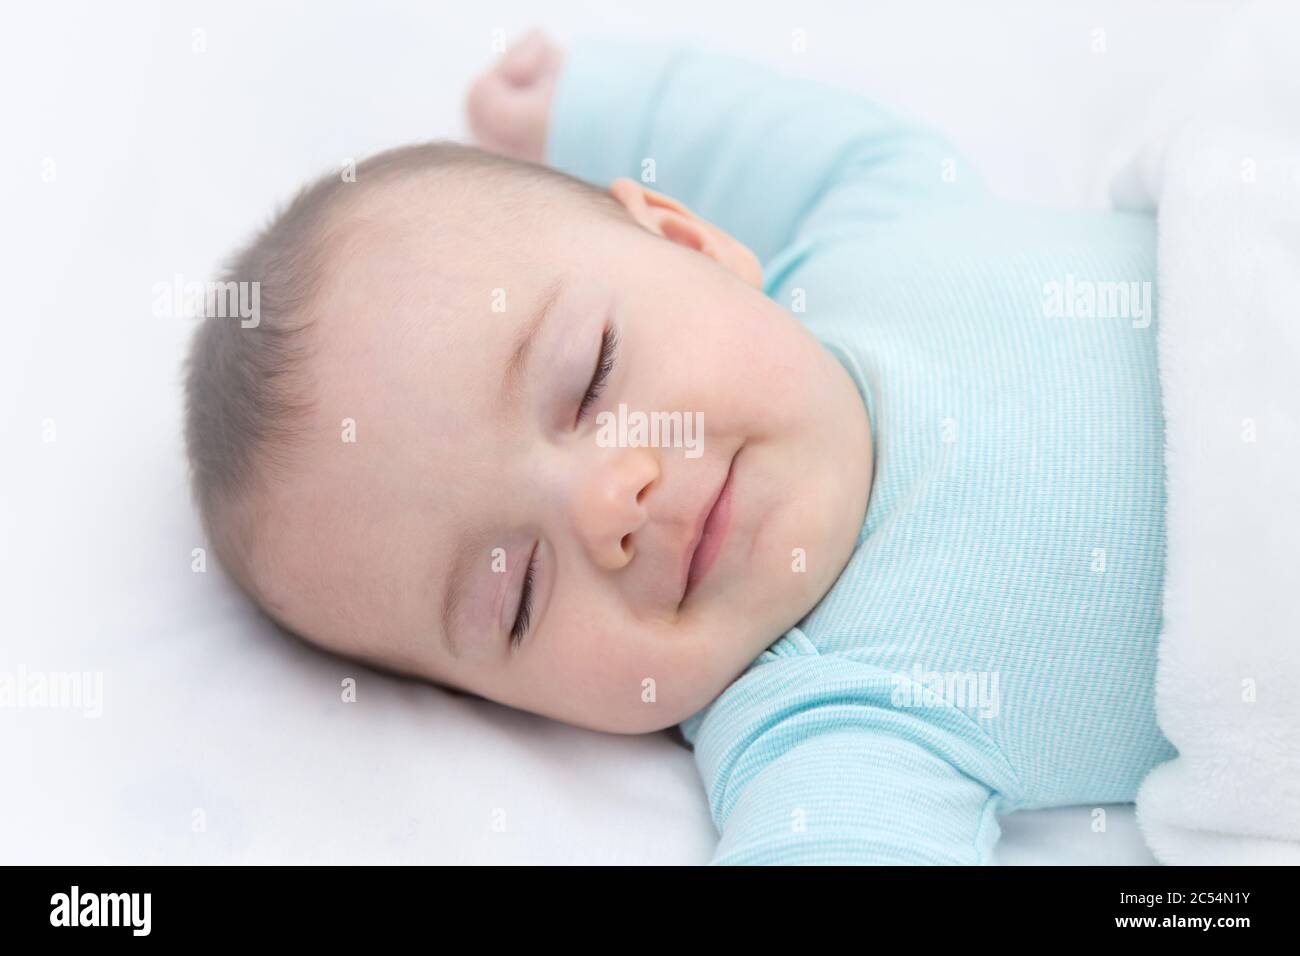 Happy baby sleeping and smiling in a cradle. Light blue pajama and white bed sheets. Stock Photo